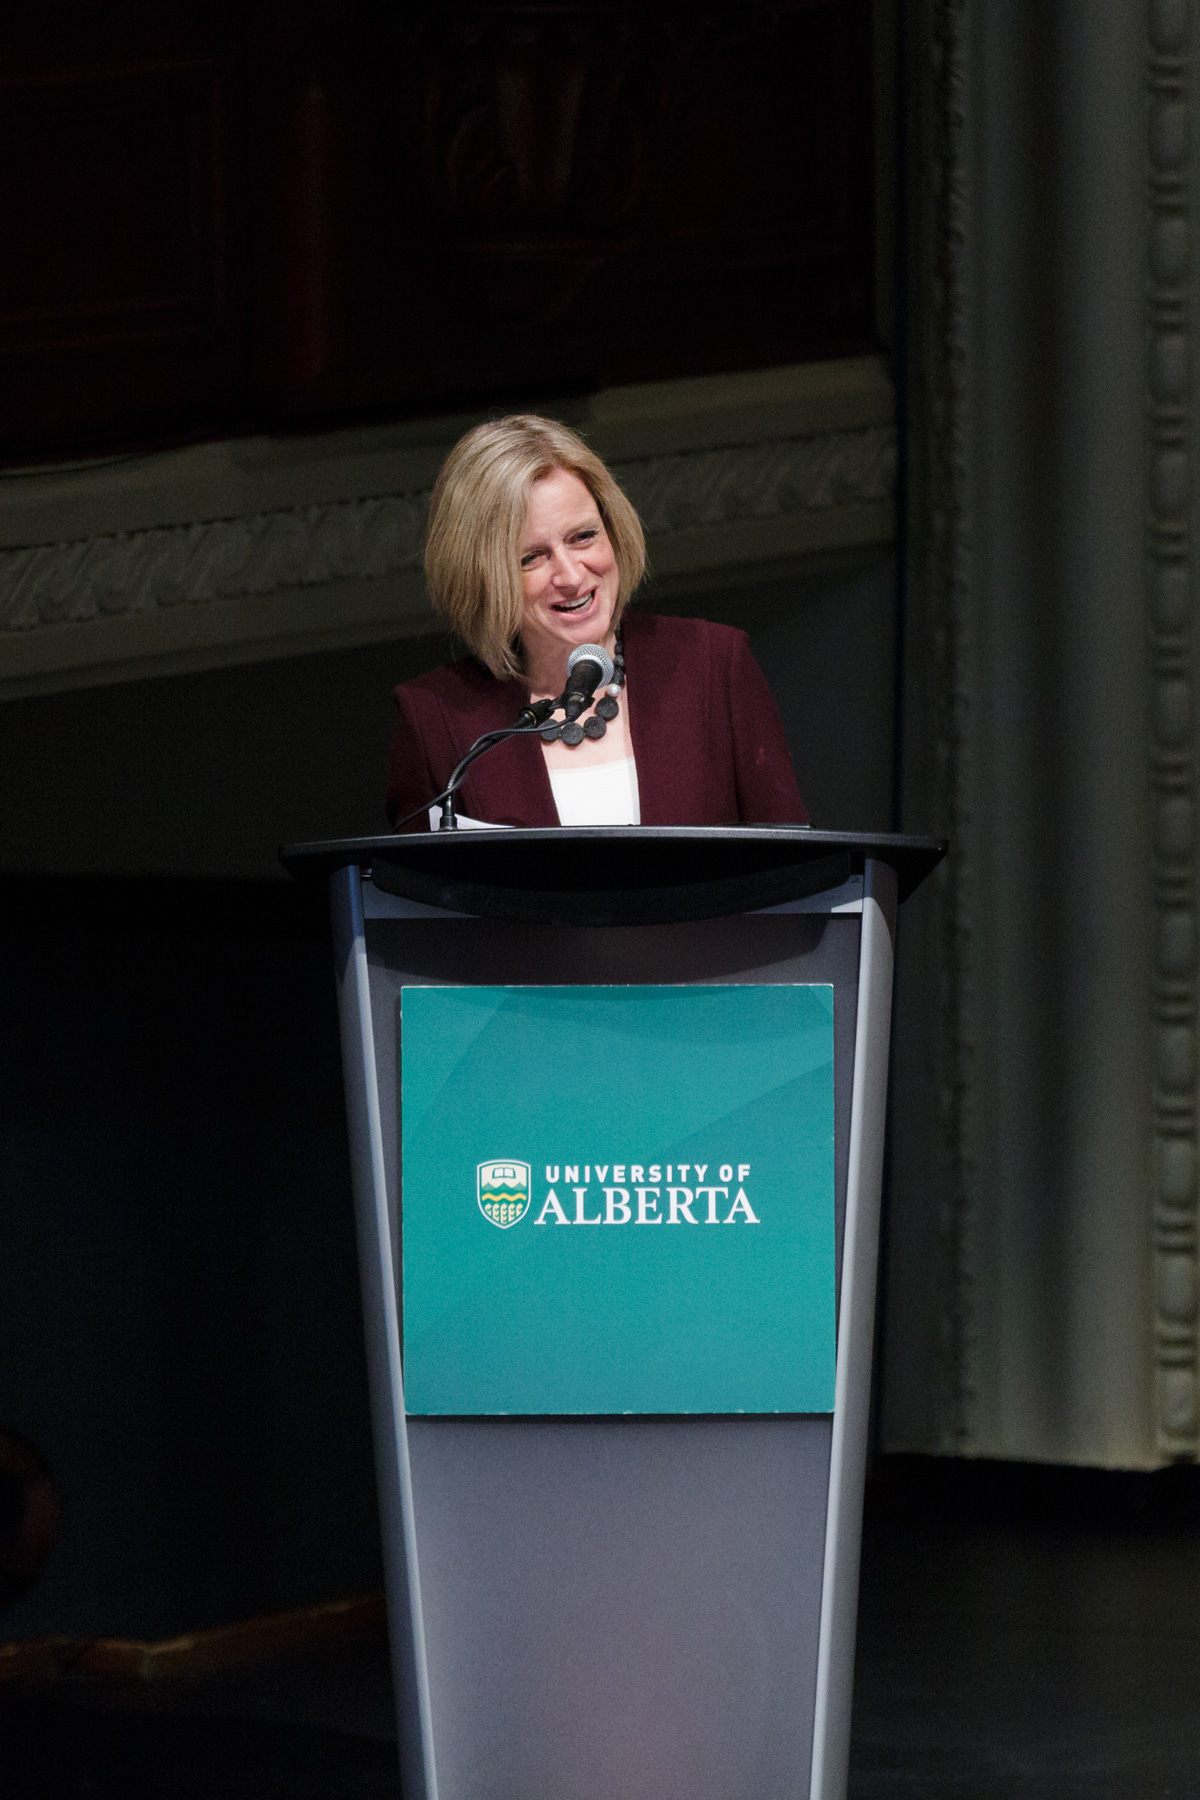 Premier Rachel Notley brings greetings from the Government of Alberta